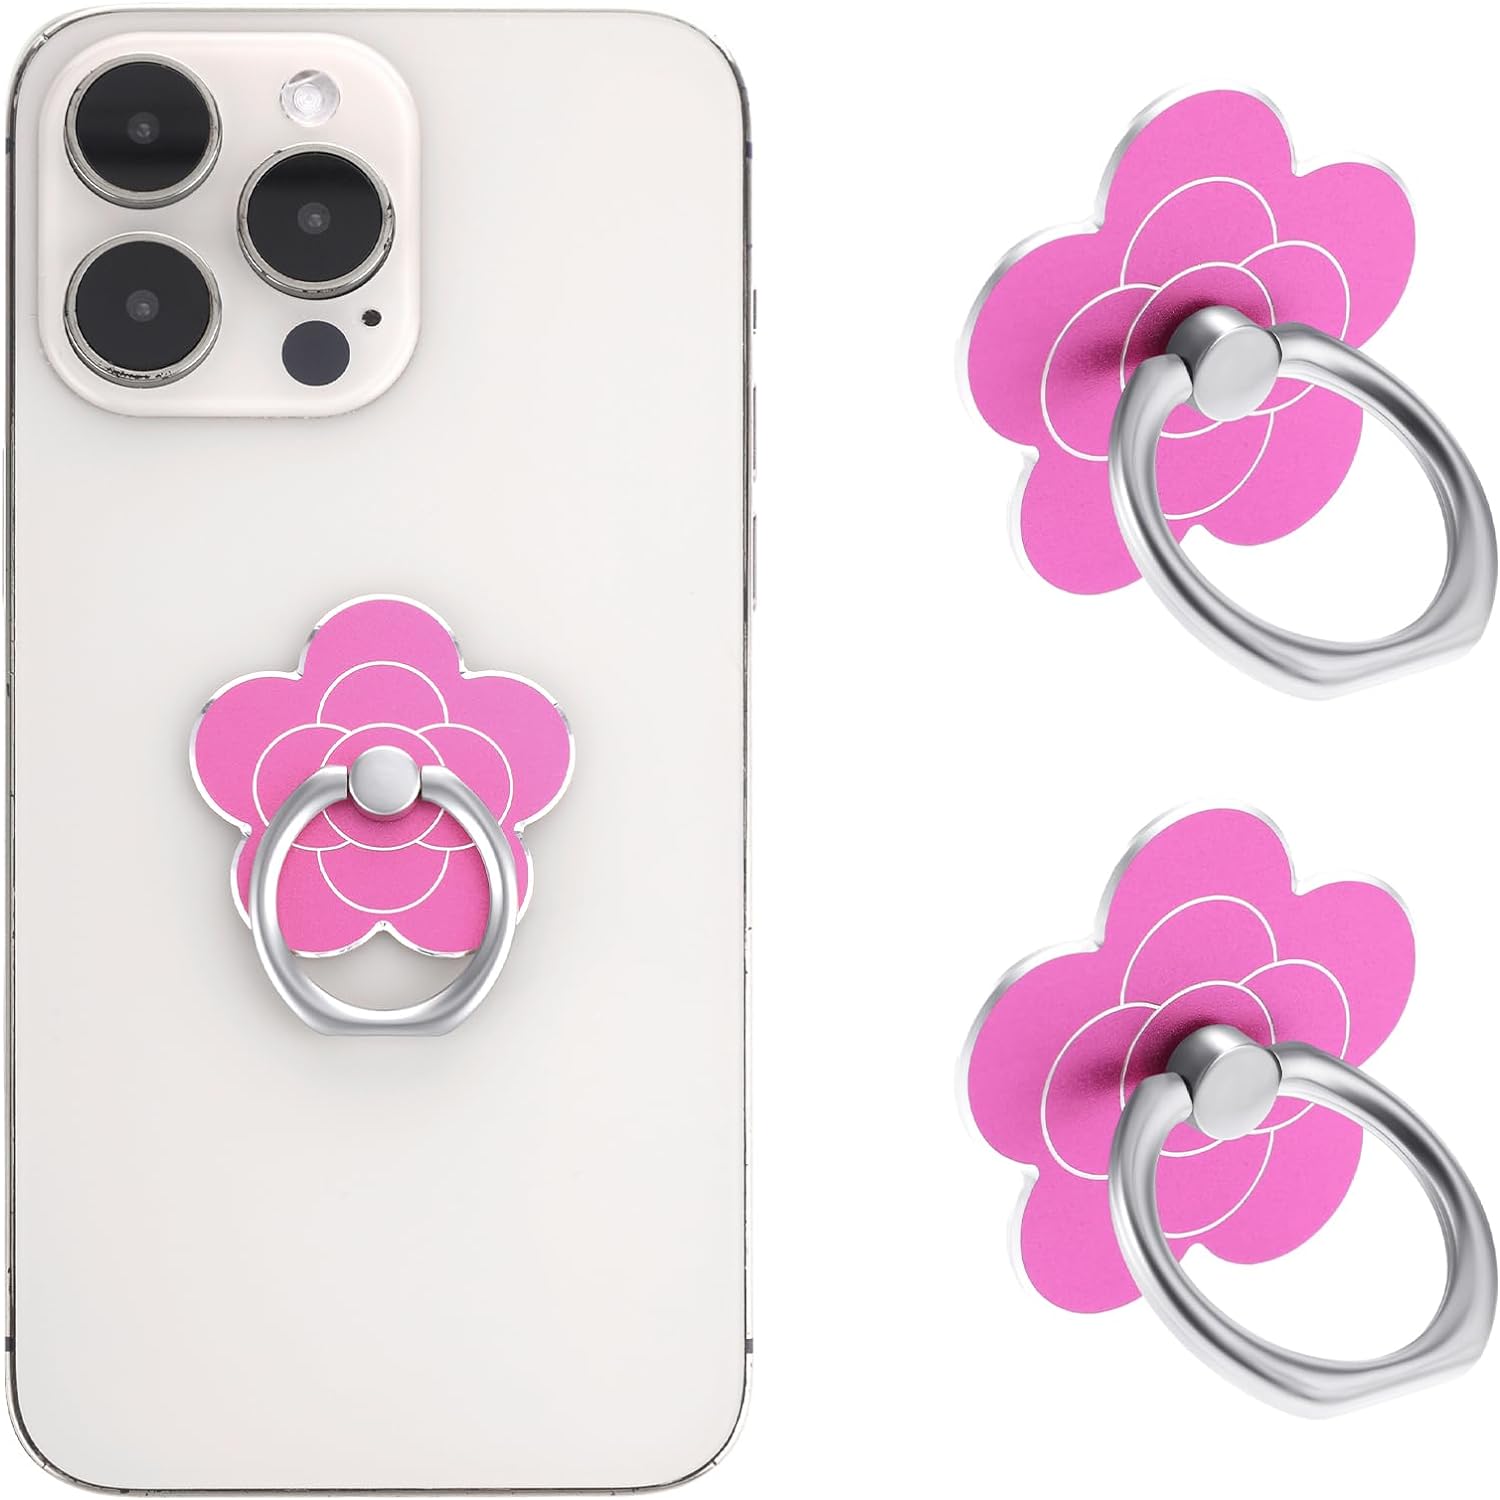 Sibba 2pcs Phone Ring Holder Kickstand Cellphone Flower Finger Ring Grips Stand Metal Universal Accessories Compatible with Smartphone, Mobile Phones, Phone case (Silver, Rose Gold) - Amazing Gadgets Outlet